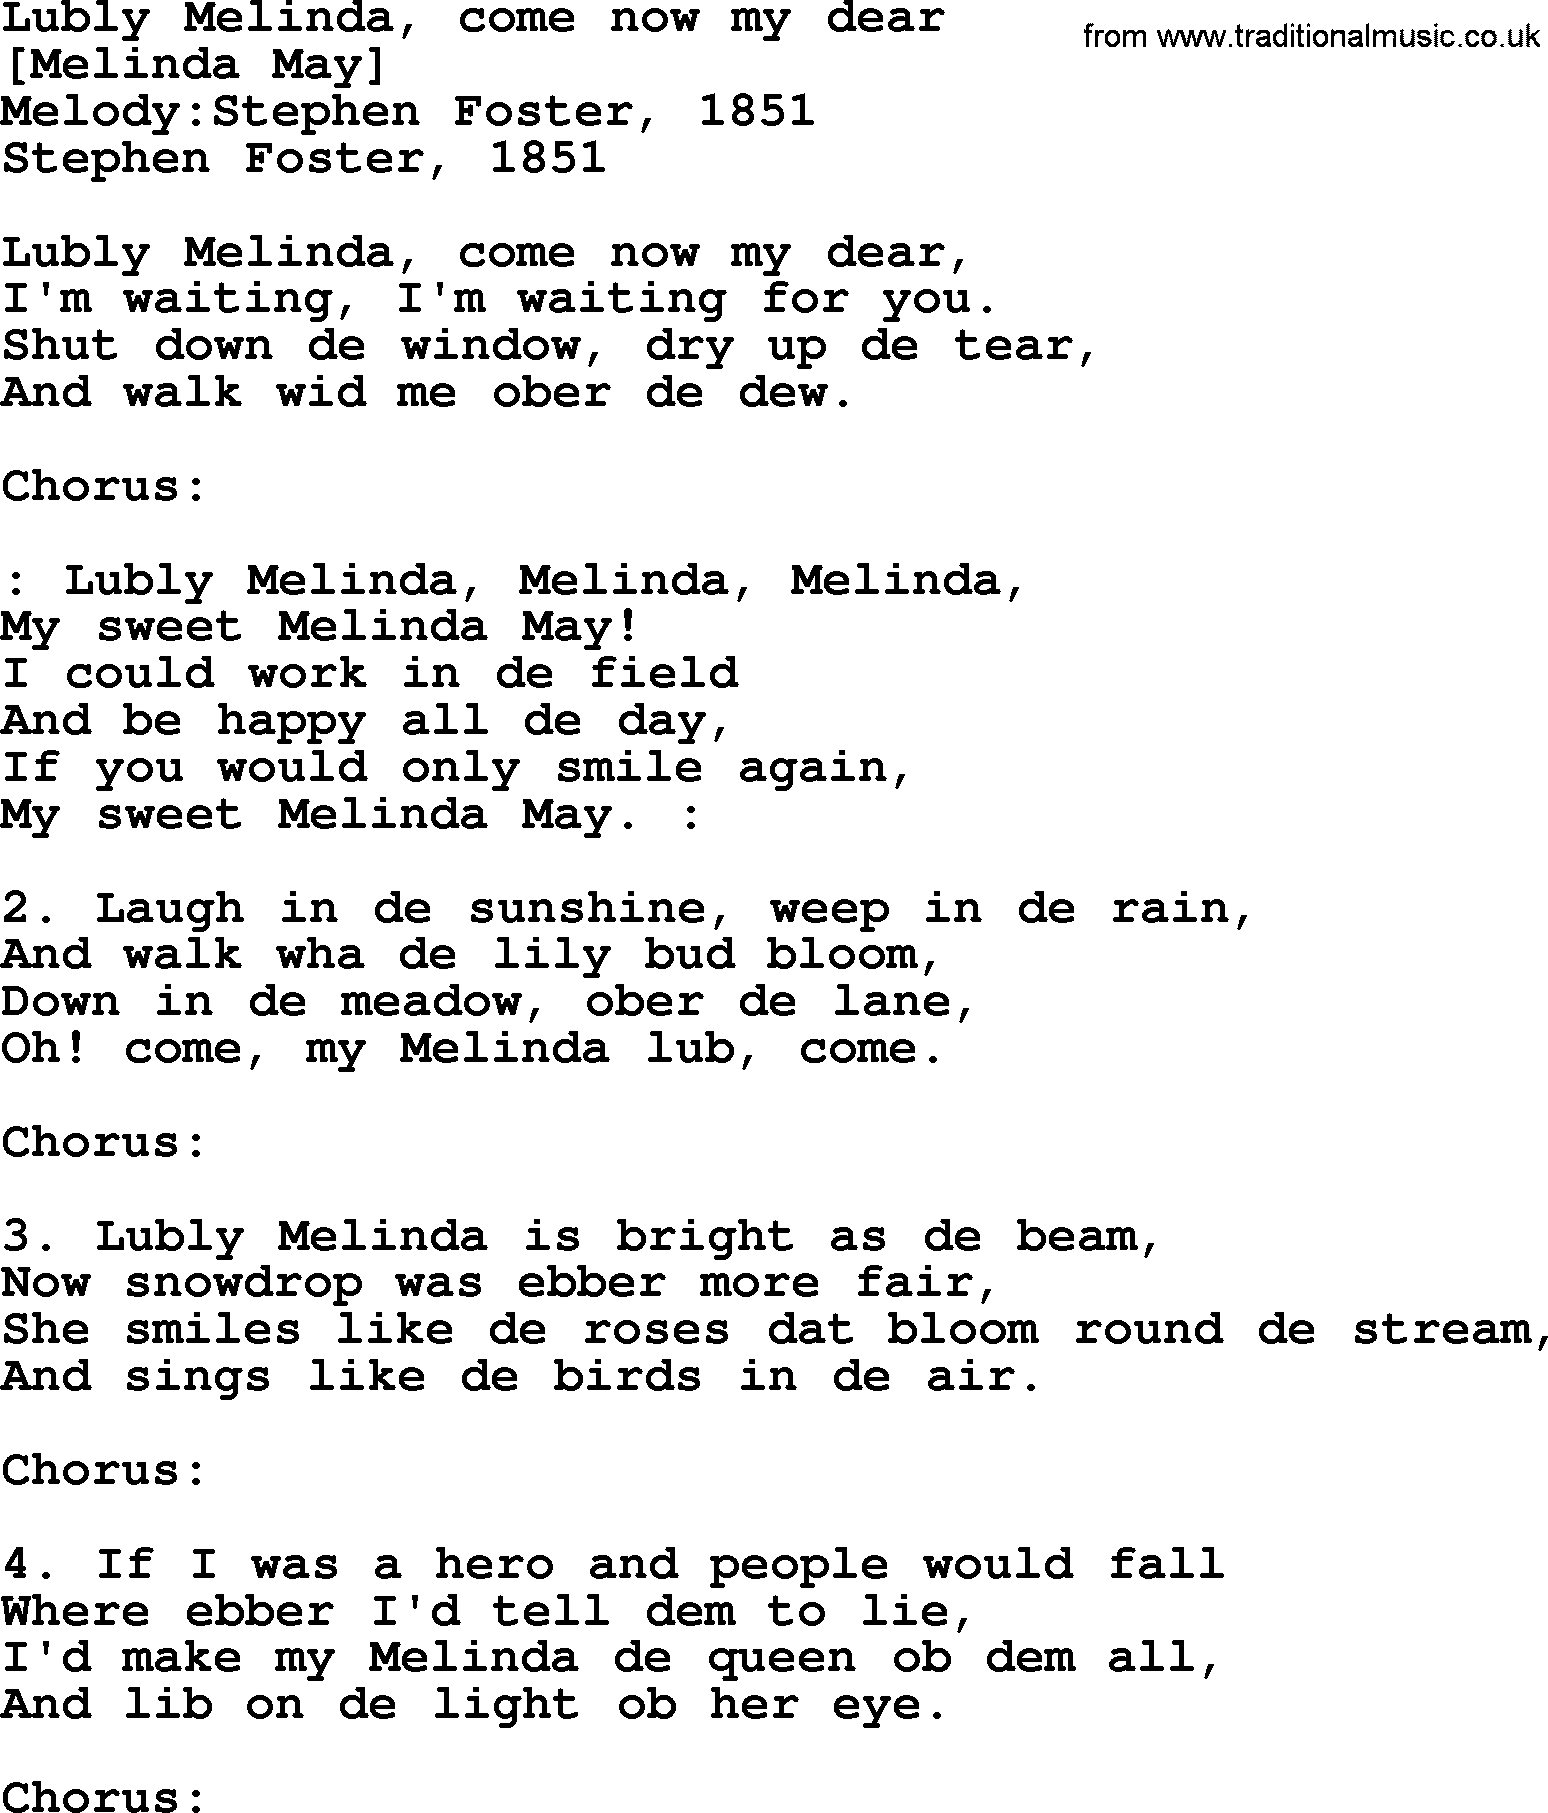 Old American Song: Lubly Melinda, Come Now My Dear, lyrics